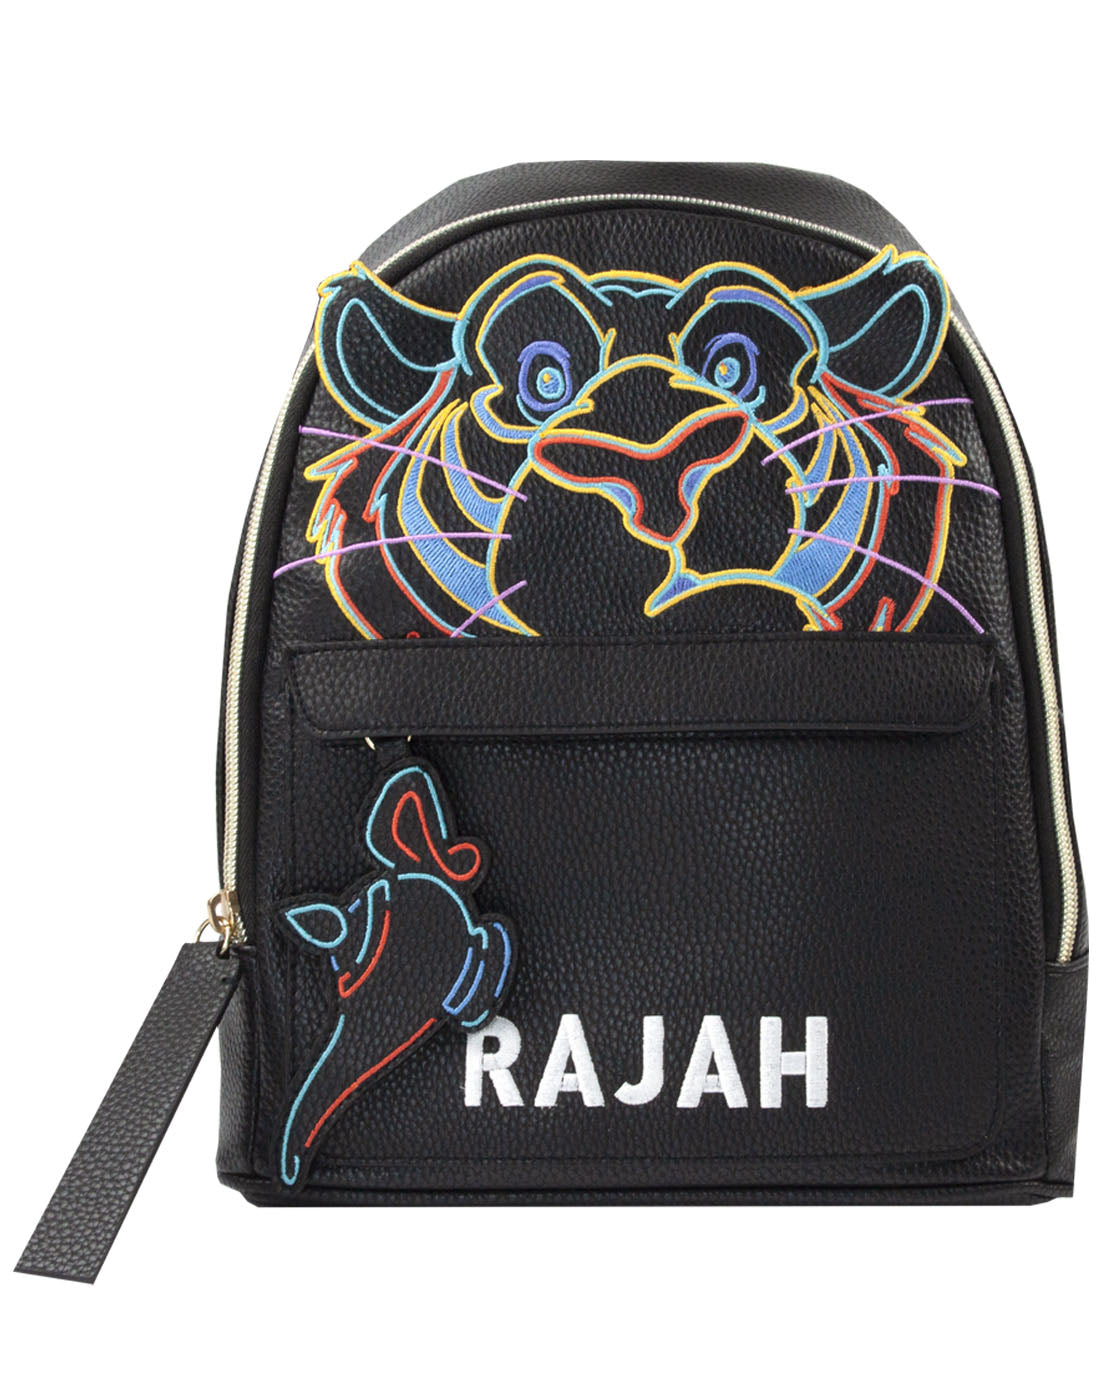 Aladdin Fans Are Going to Love This Unique Bag from Danielle Nicole   Disney Fashion Blog